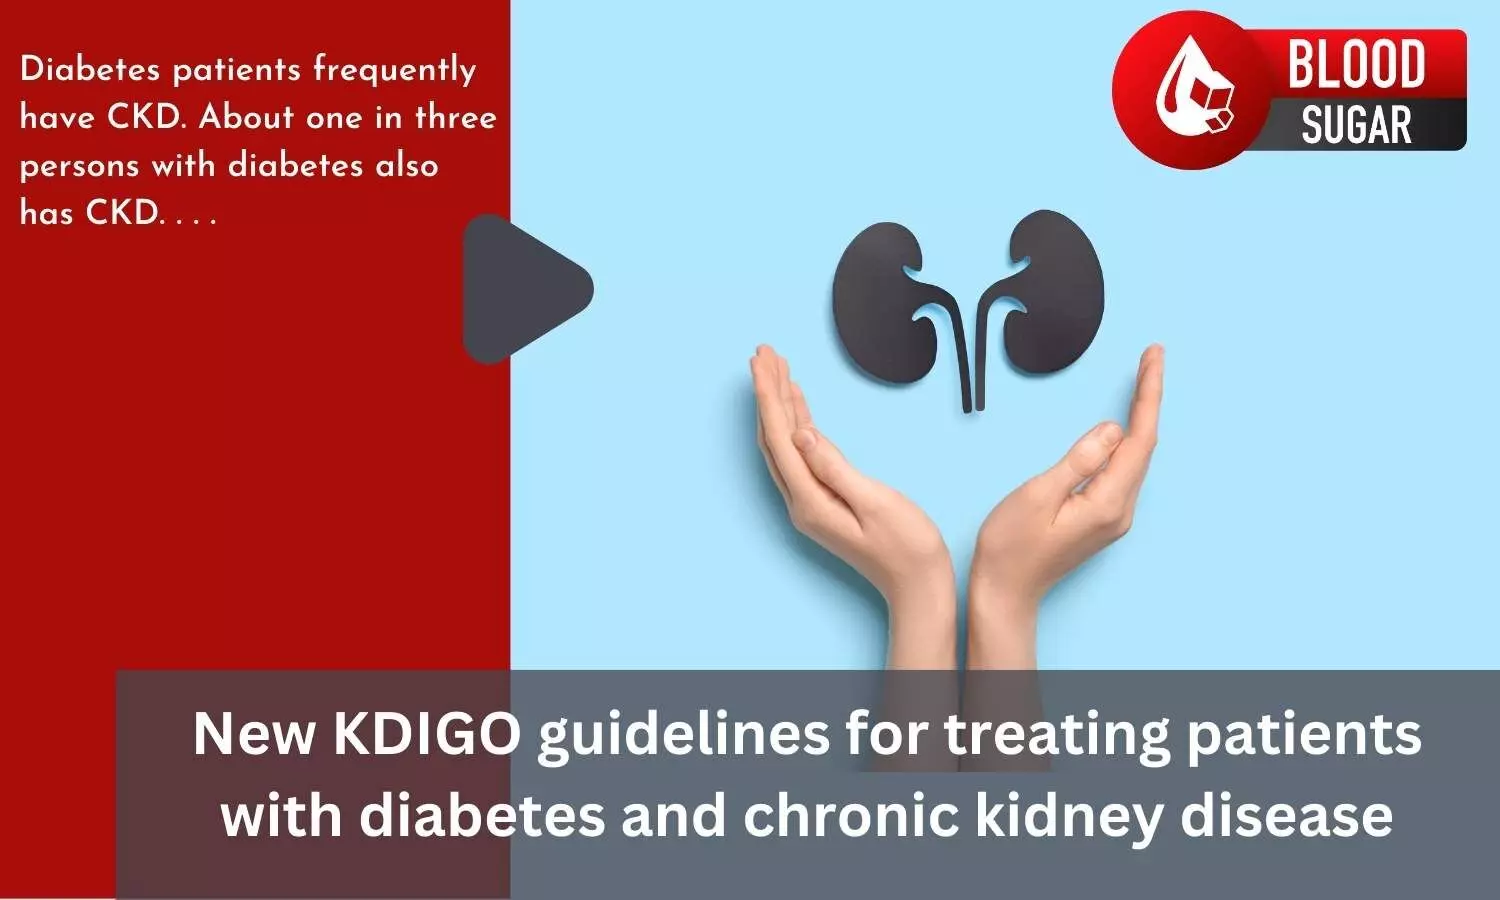 New KDIGO guidelines for treating patients with diabetes and chronic kidney disease